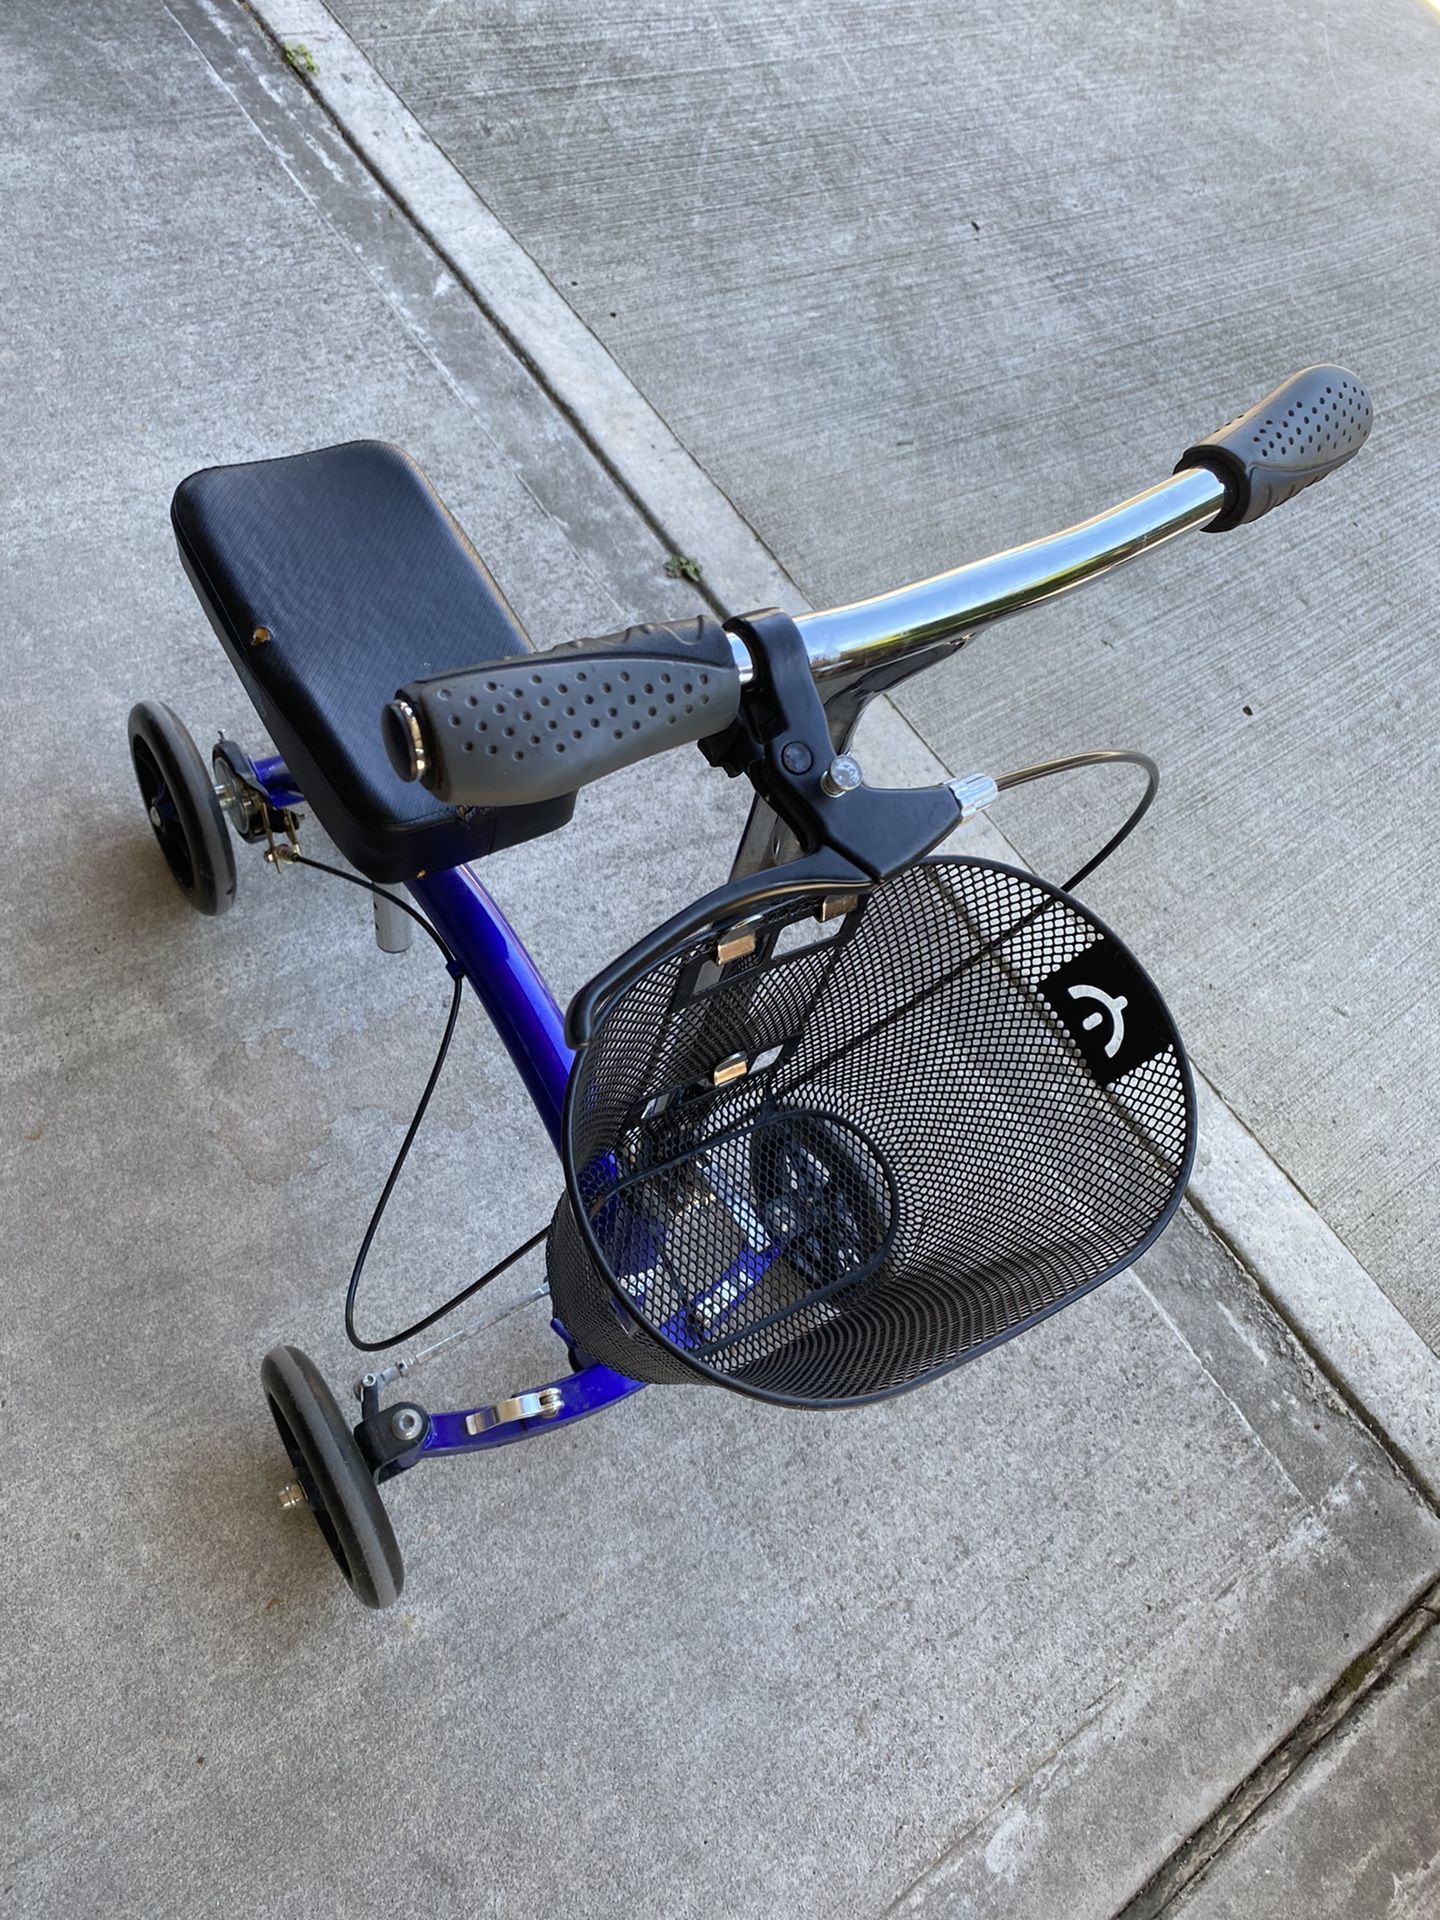 Knee Scooter 